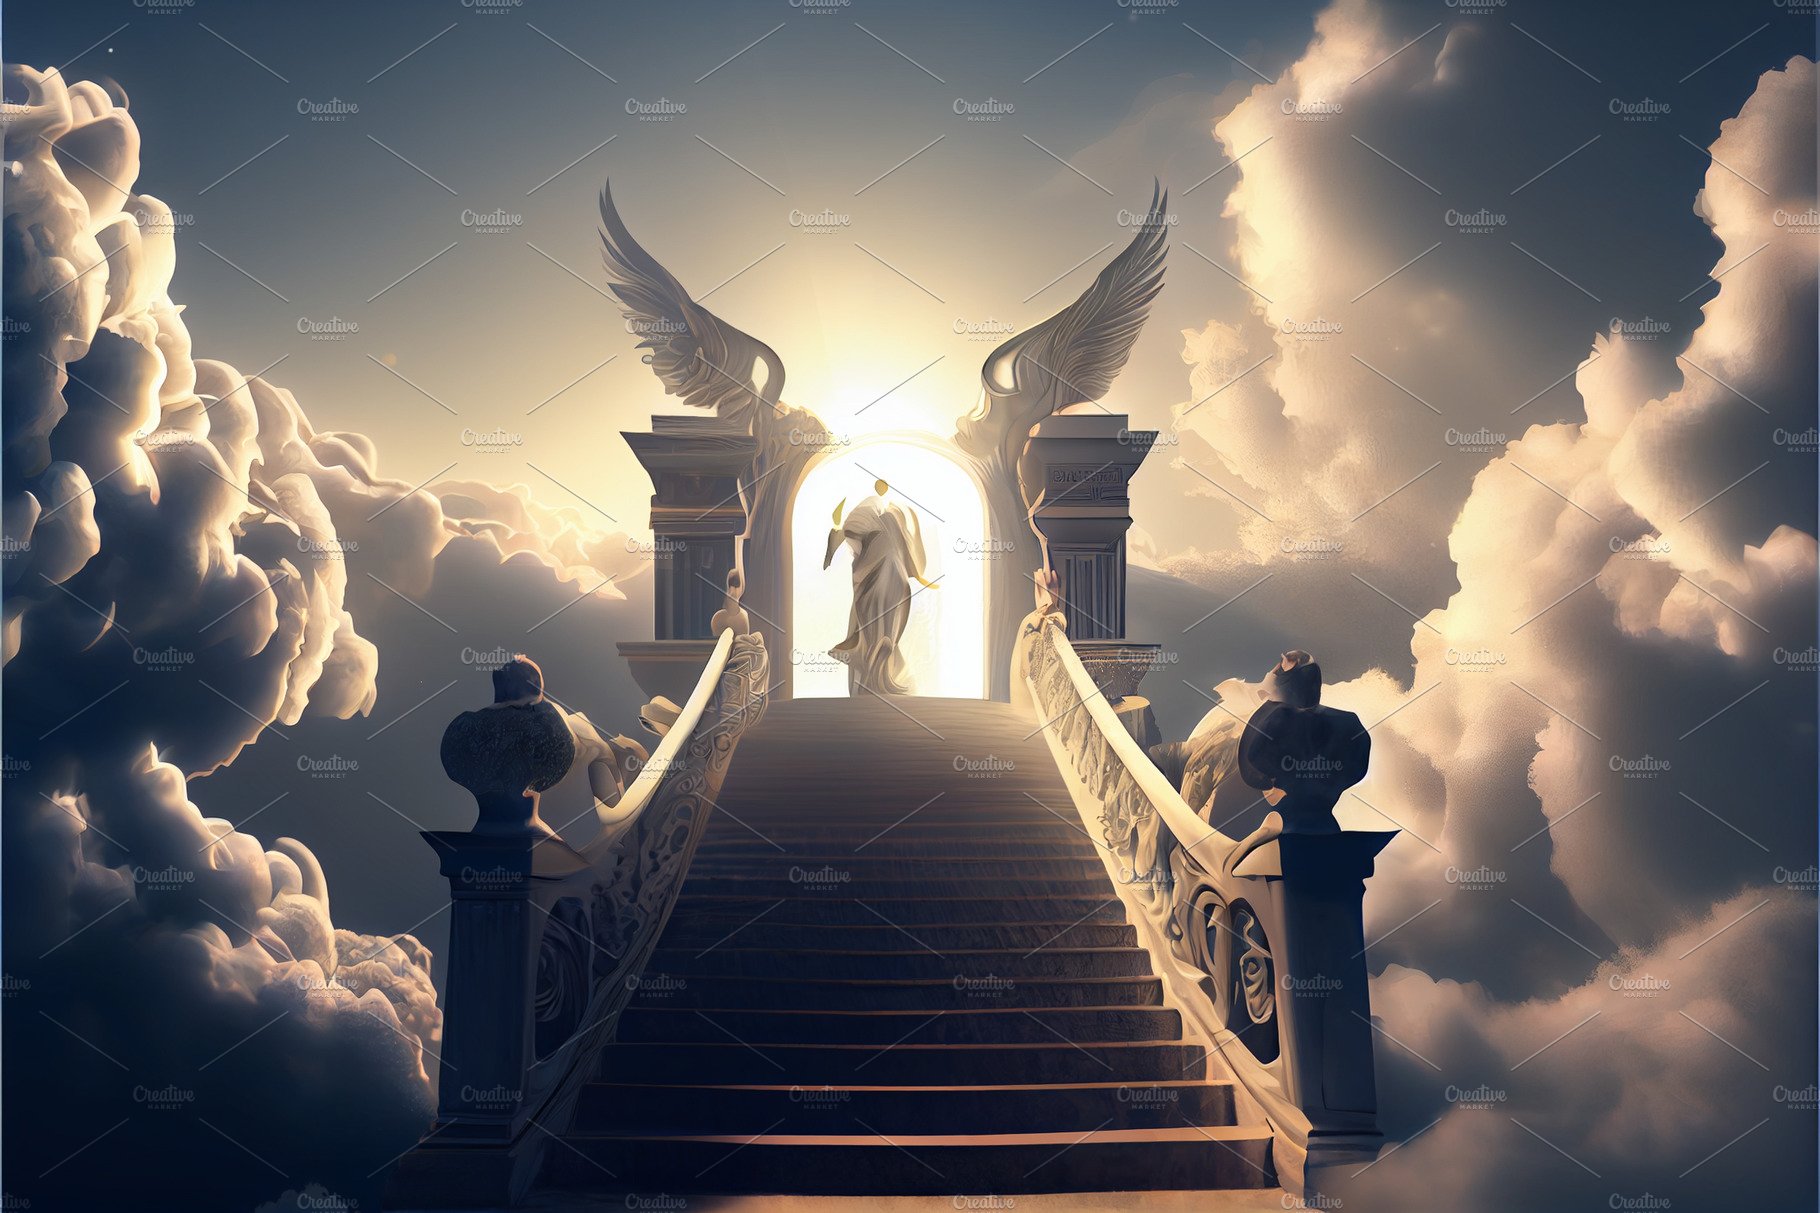 Gate of heaven concept religious bible imagery cover image.